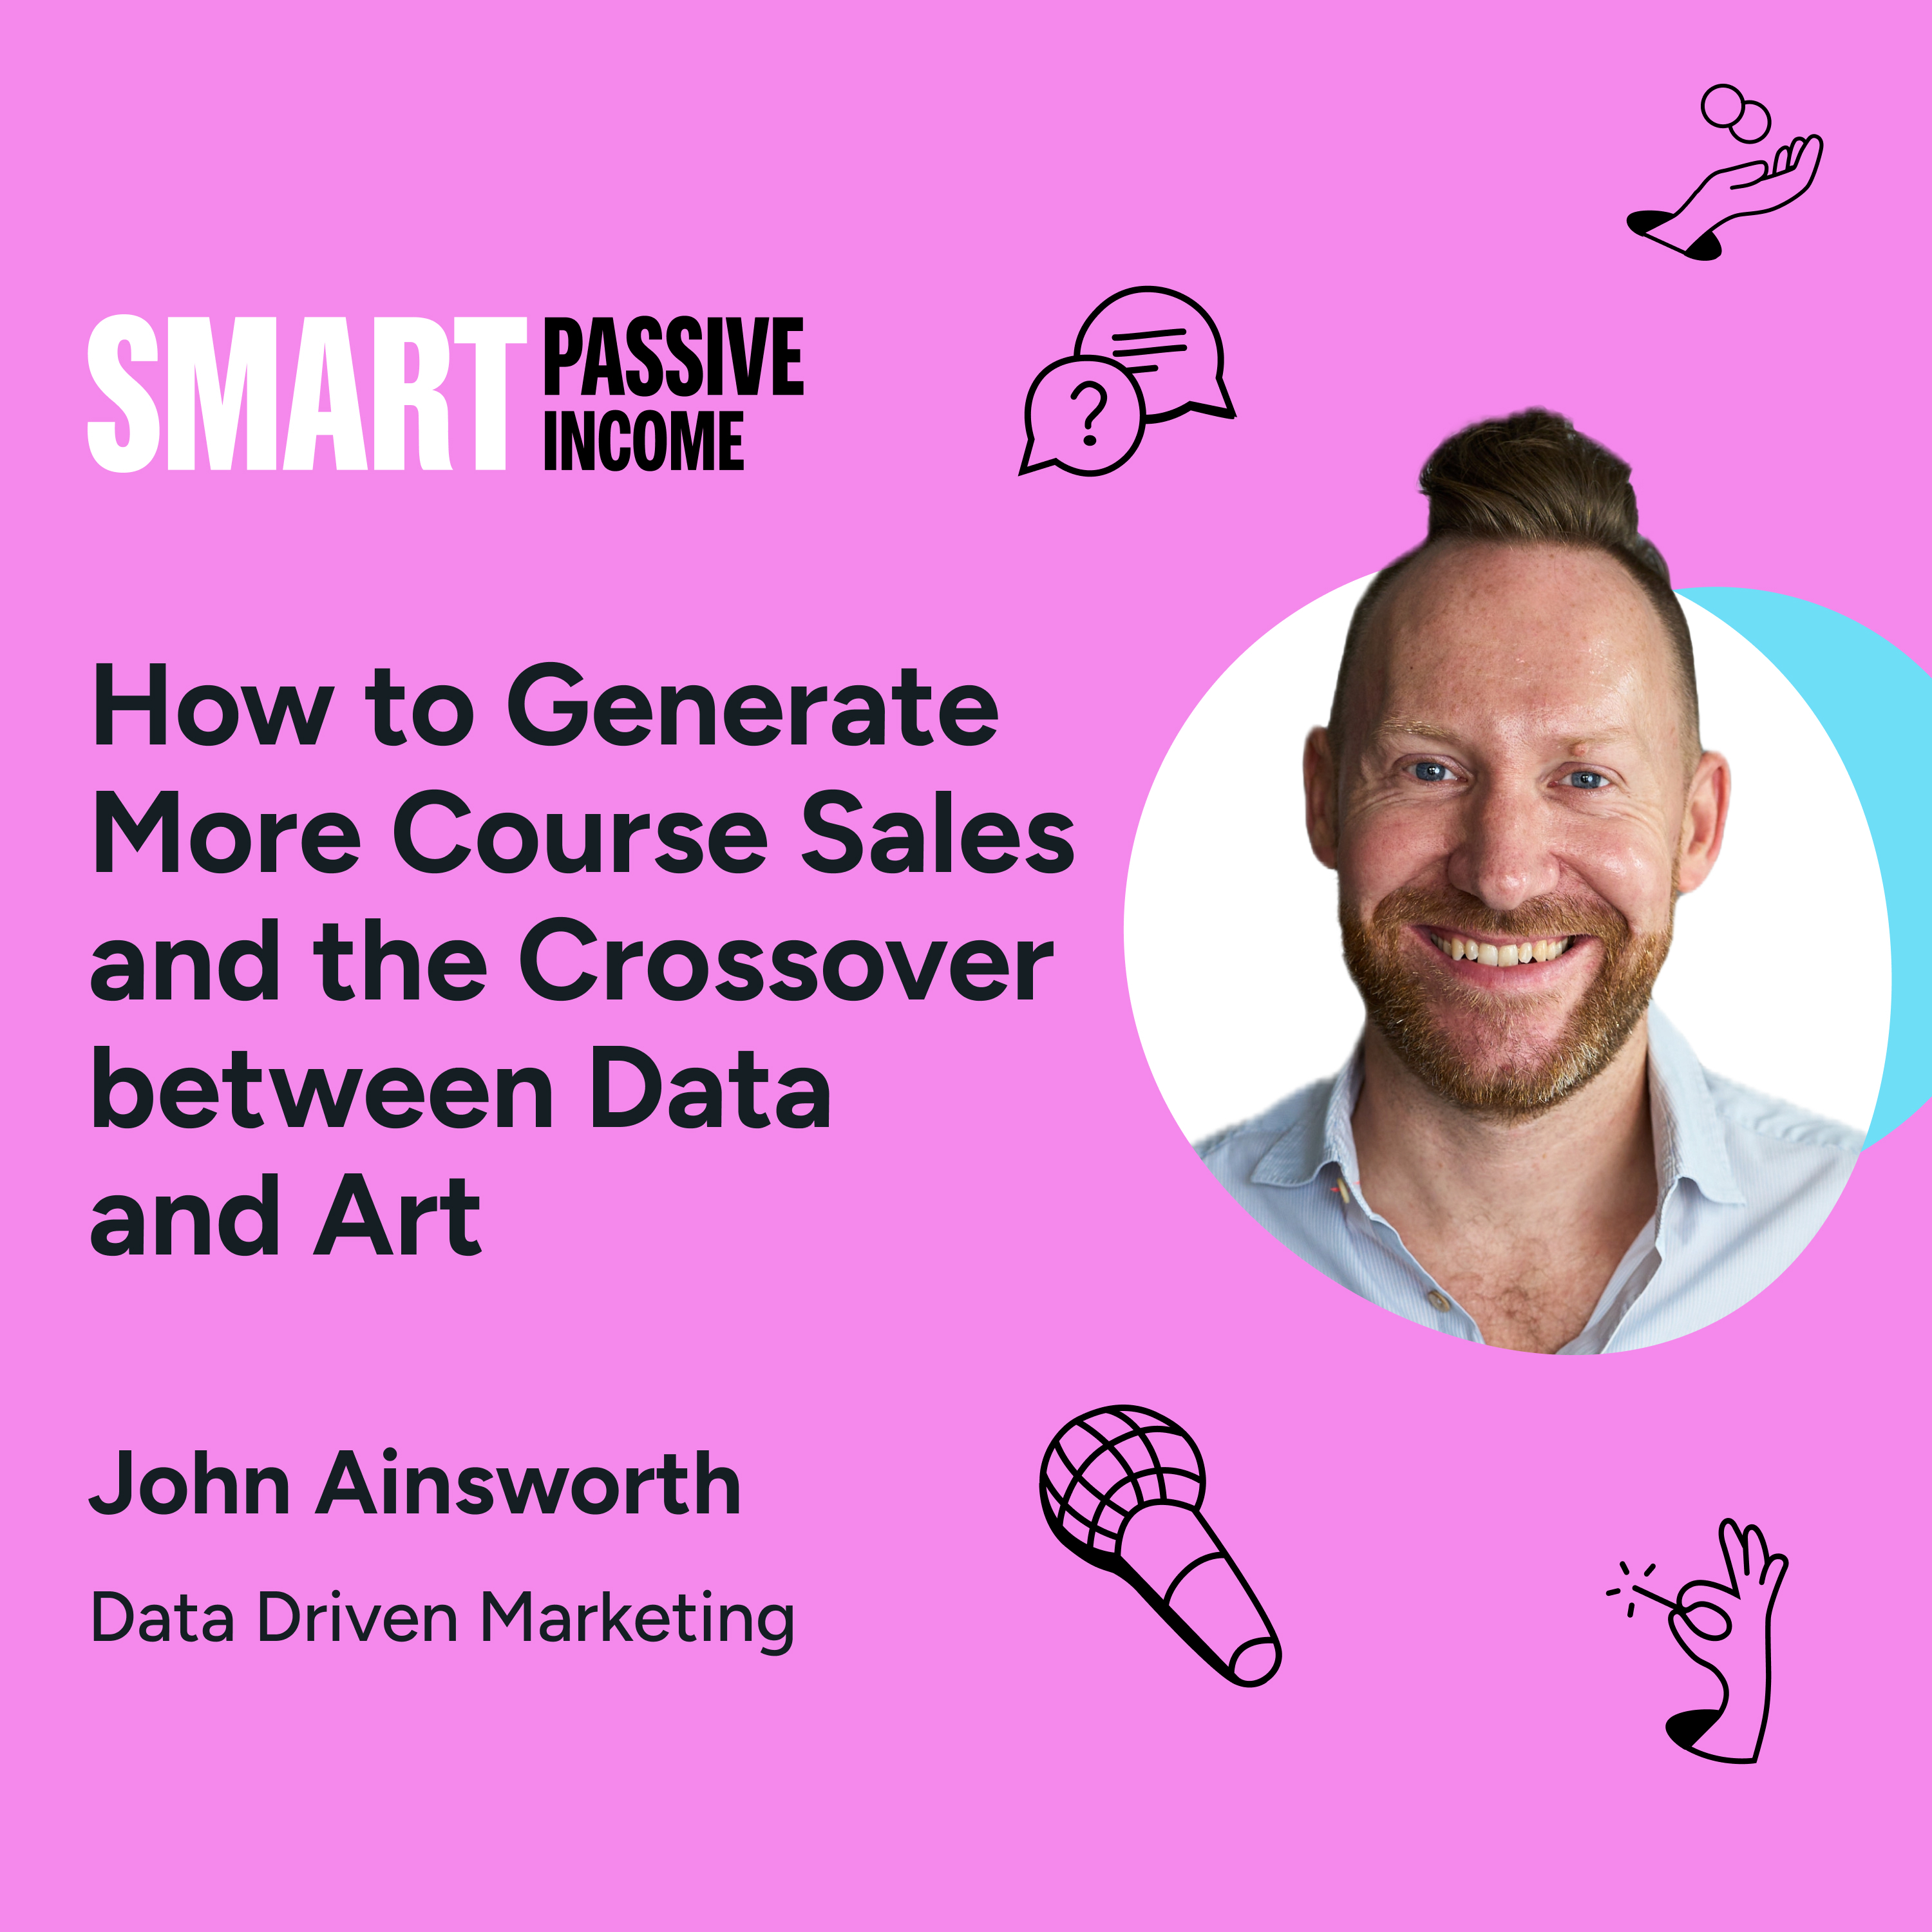 SPI 791: How to Generate More Course Sales and the Crossover between Data and Art with John Ainsworth